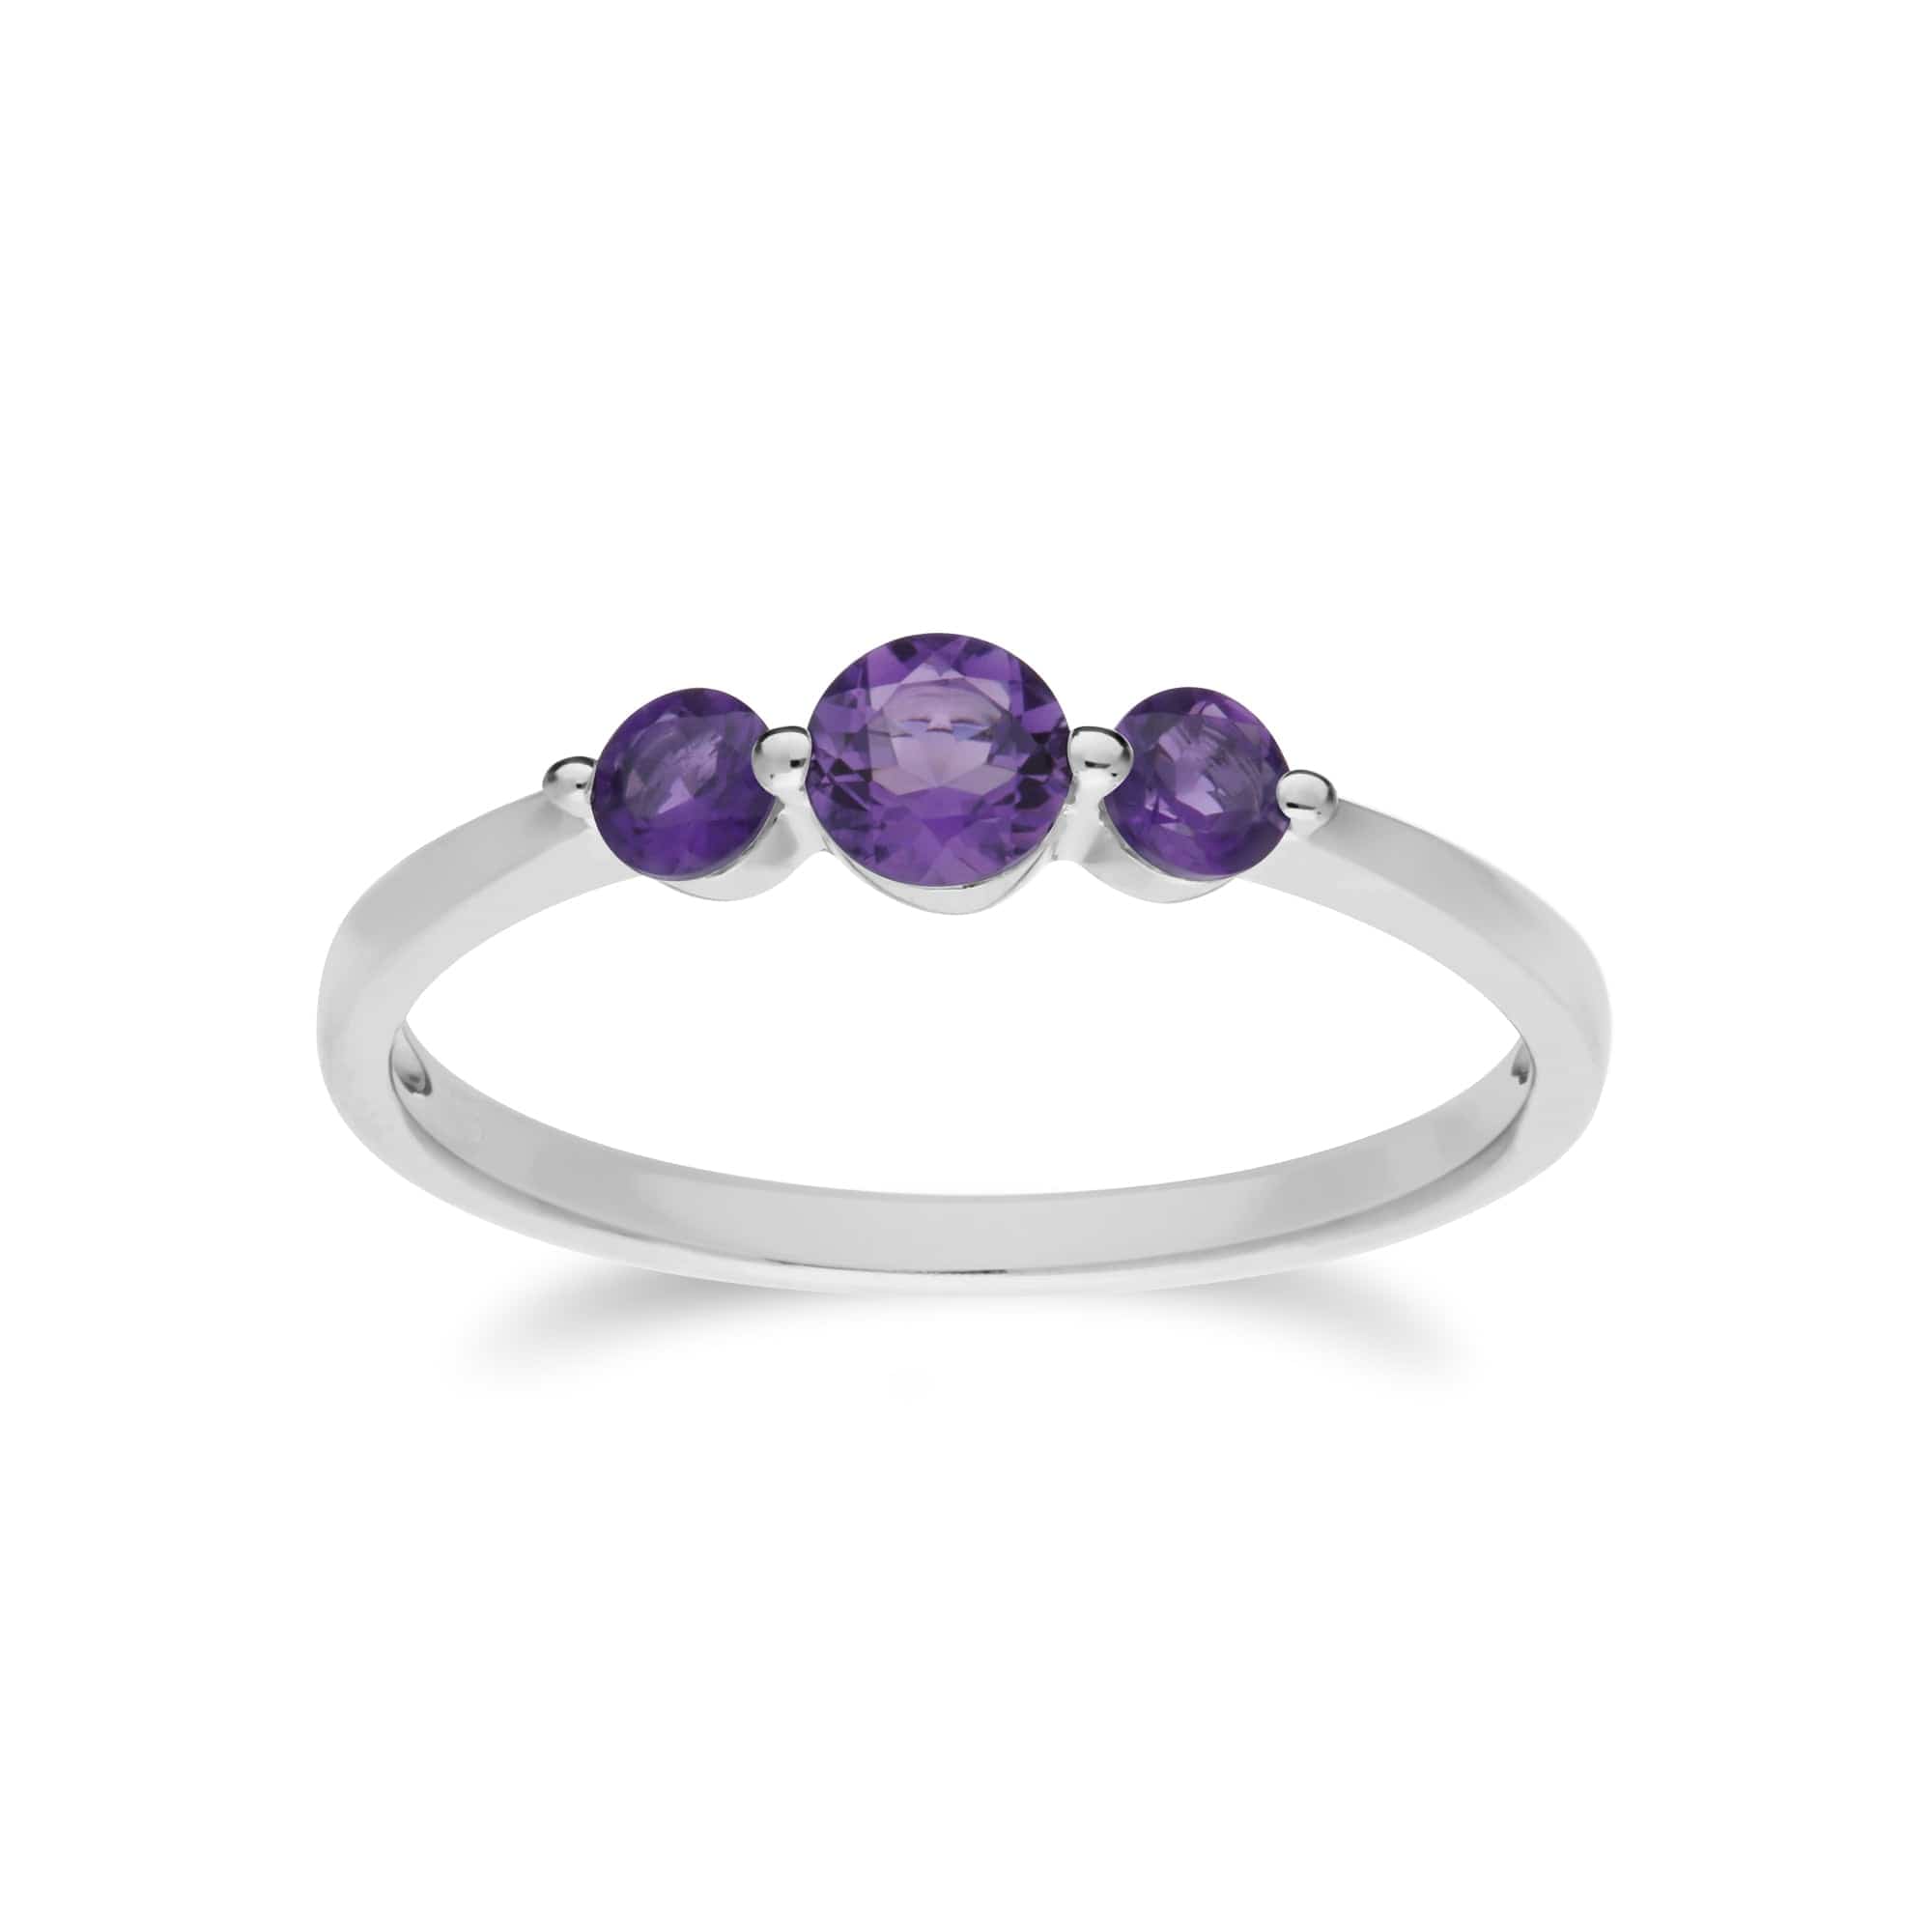 270L011103925-270R056003925 Classic Round Amethyst Three Stone Bracelet & Trilogy Ring Set in 925 Sterling Silver 3